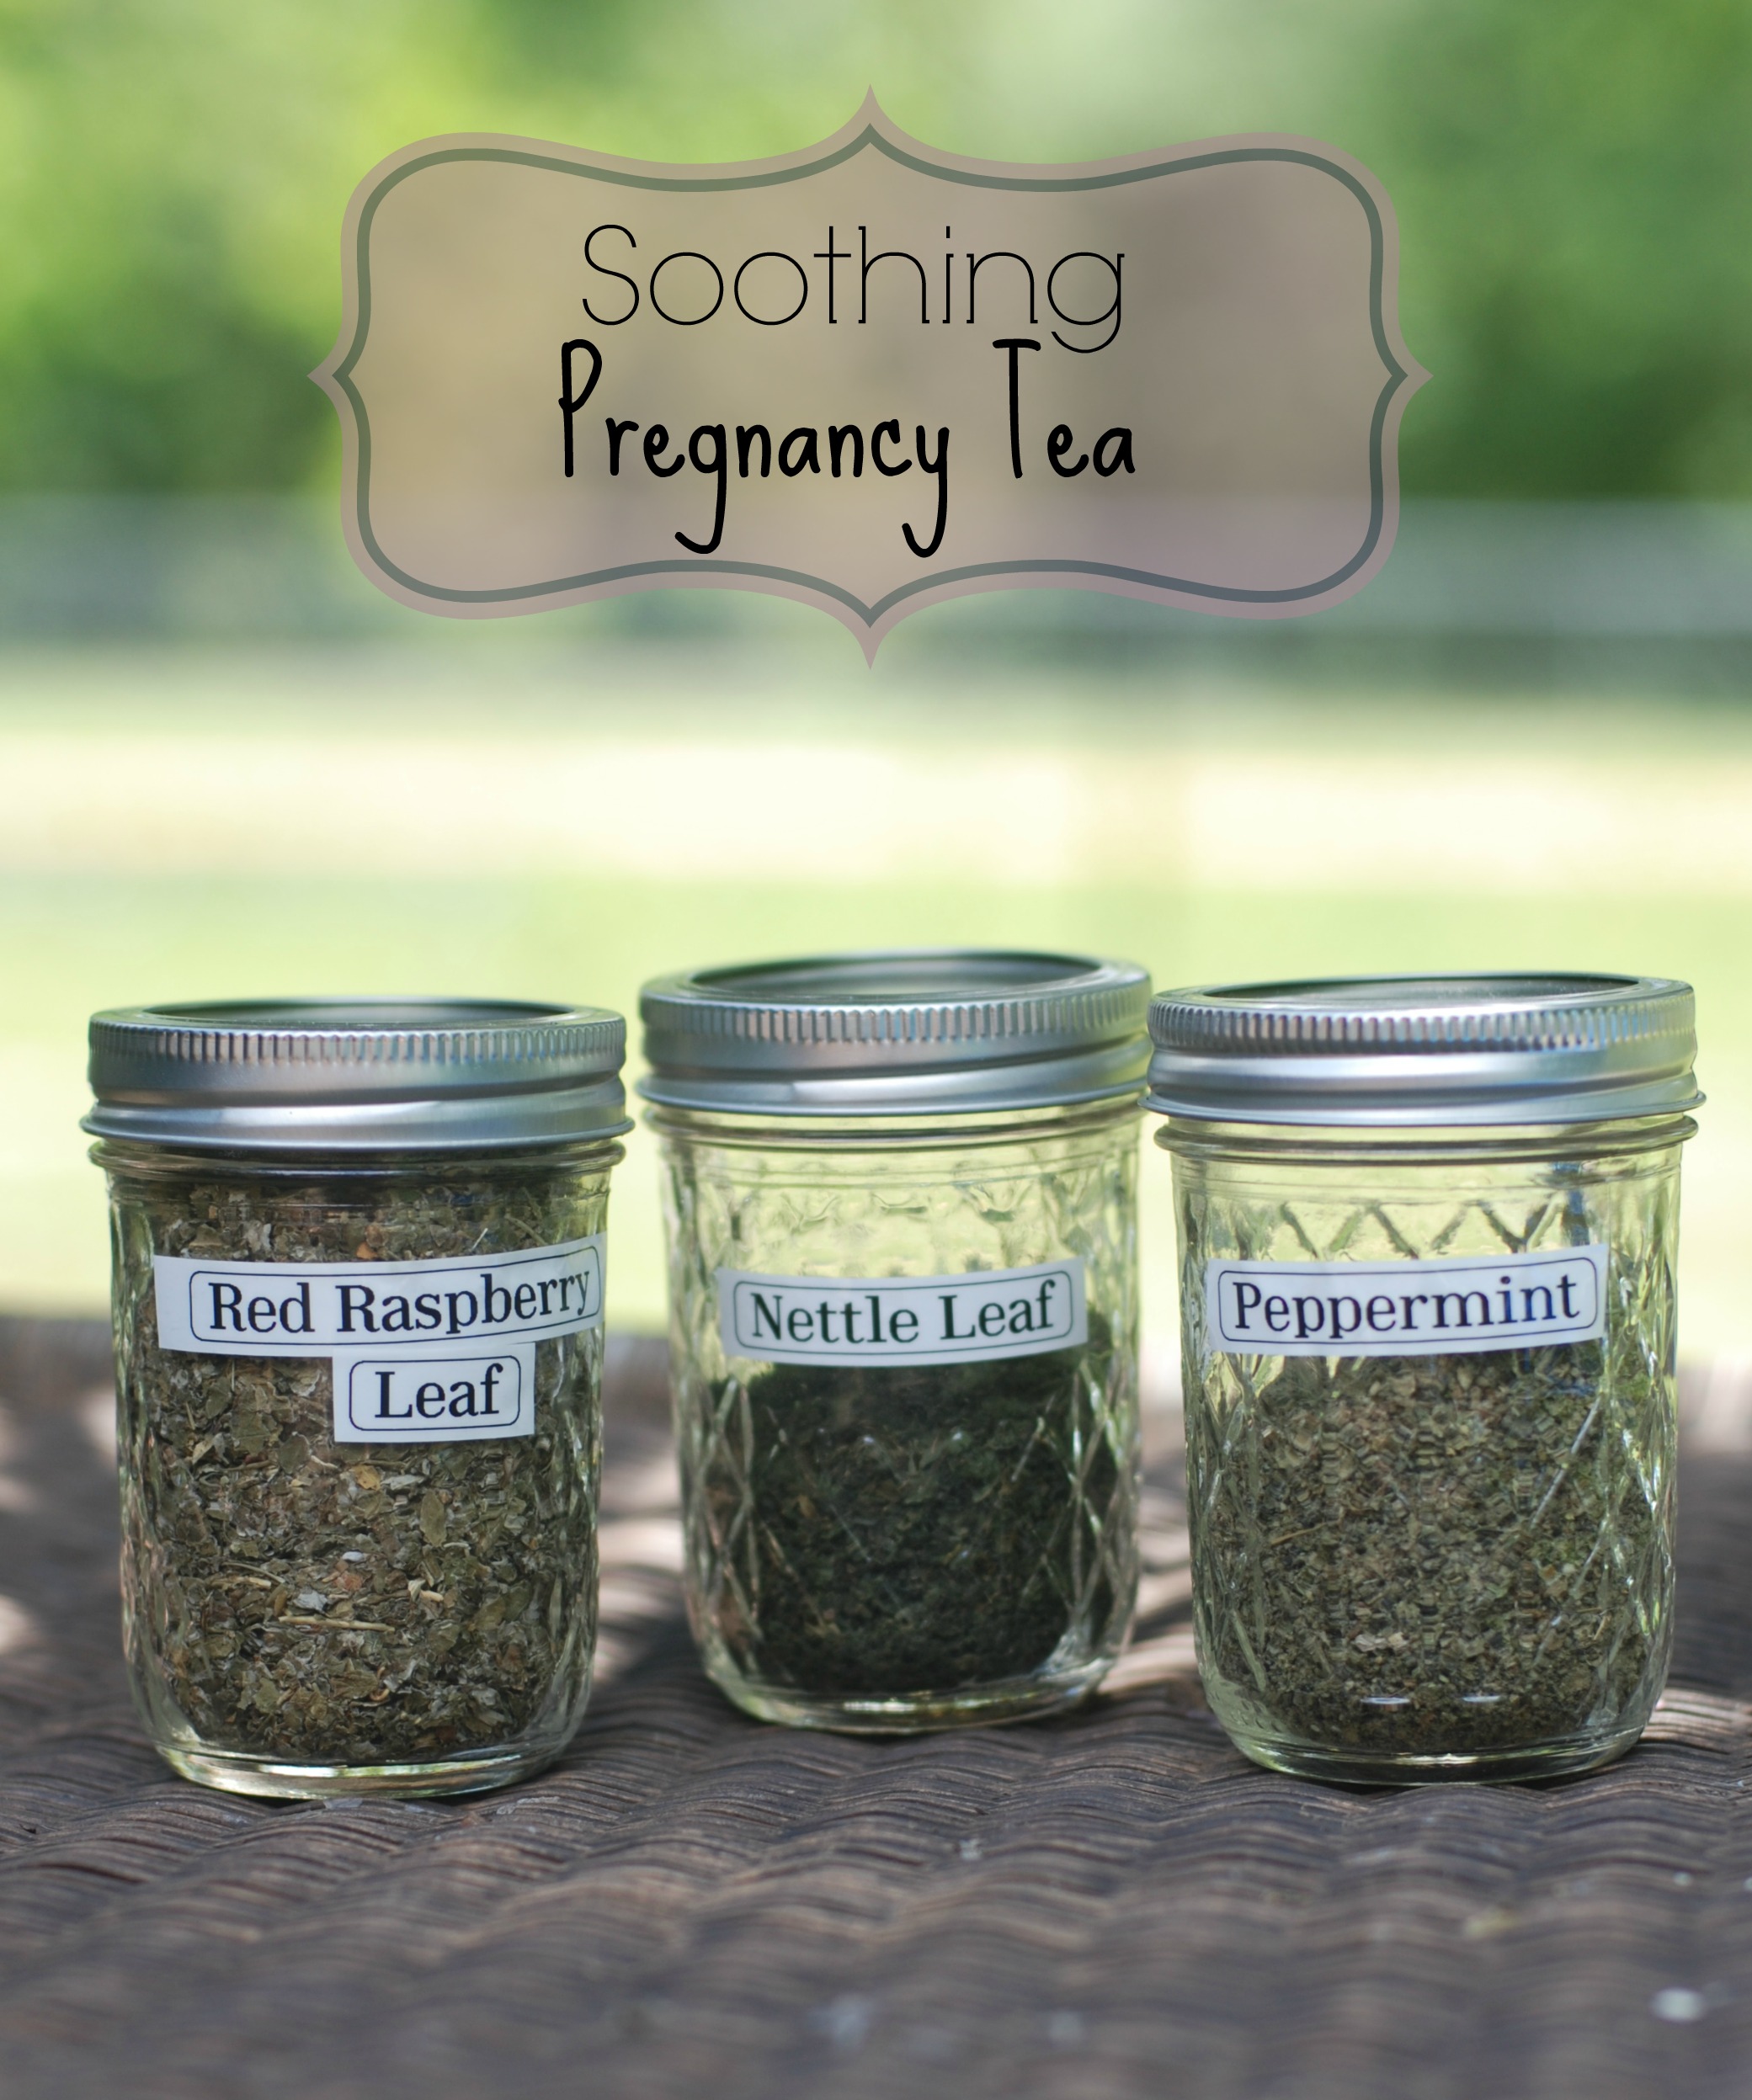 Soothing Pregnancy Tea - The Toups Address